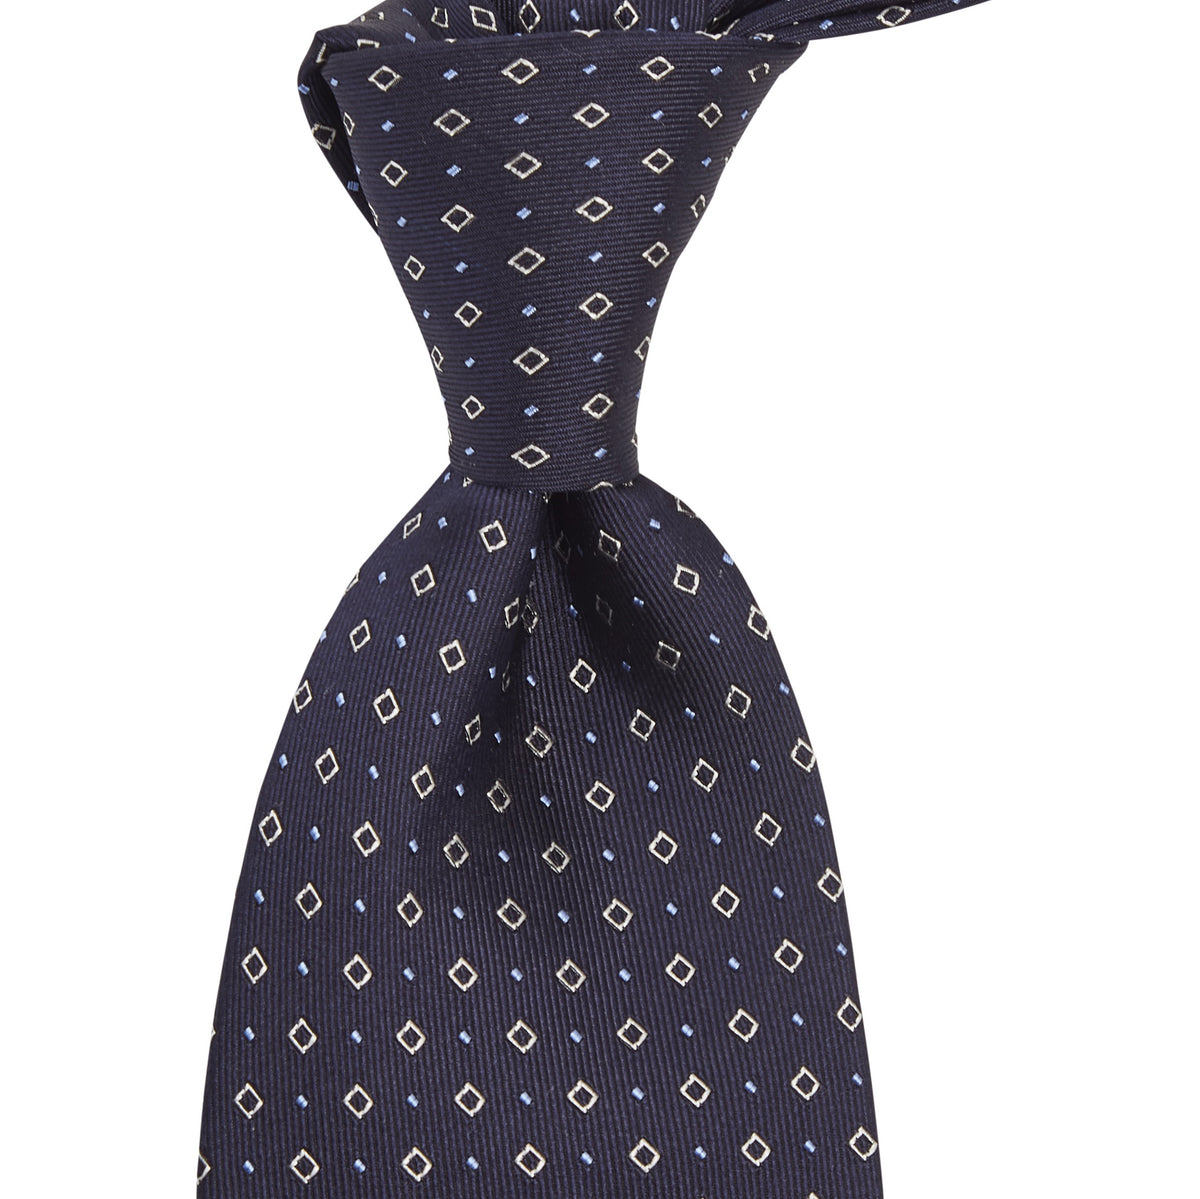 A handmade Sovereign Grade Midnight Blue Alternating Square Dot Jacquard Tie from KirbyAllison.com with a black and white polka dot pattern.